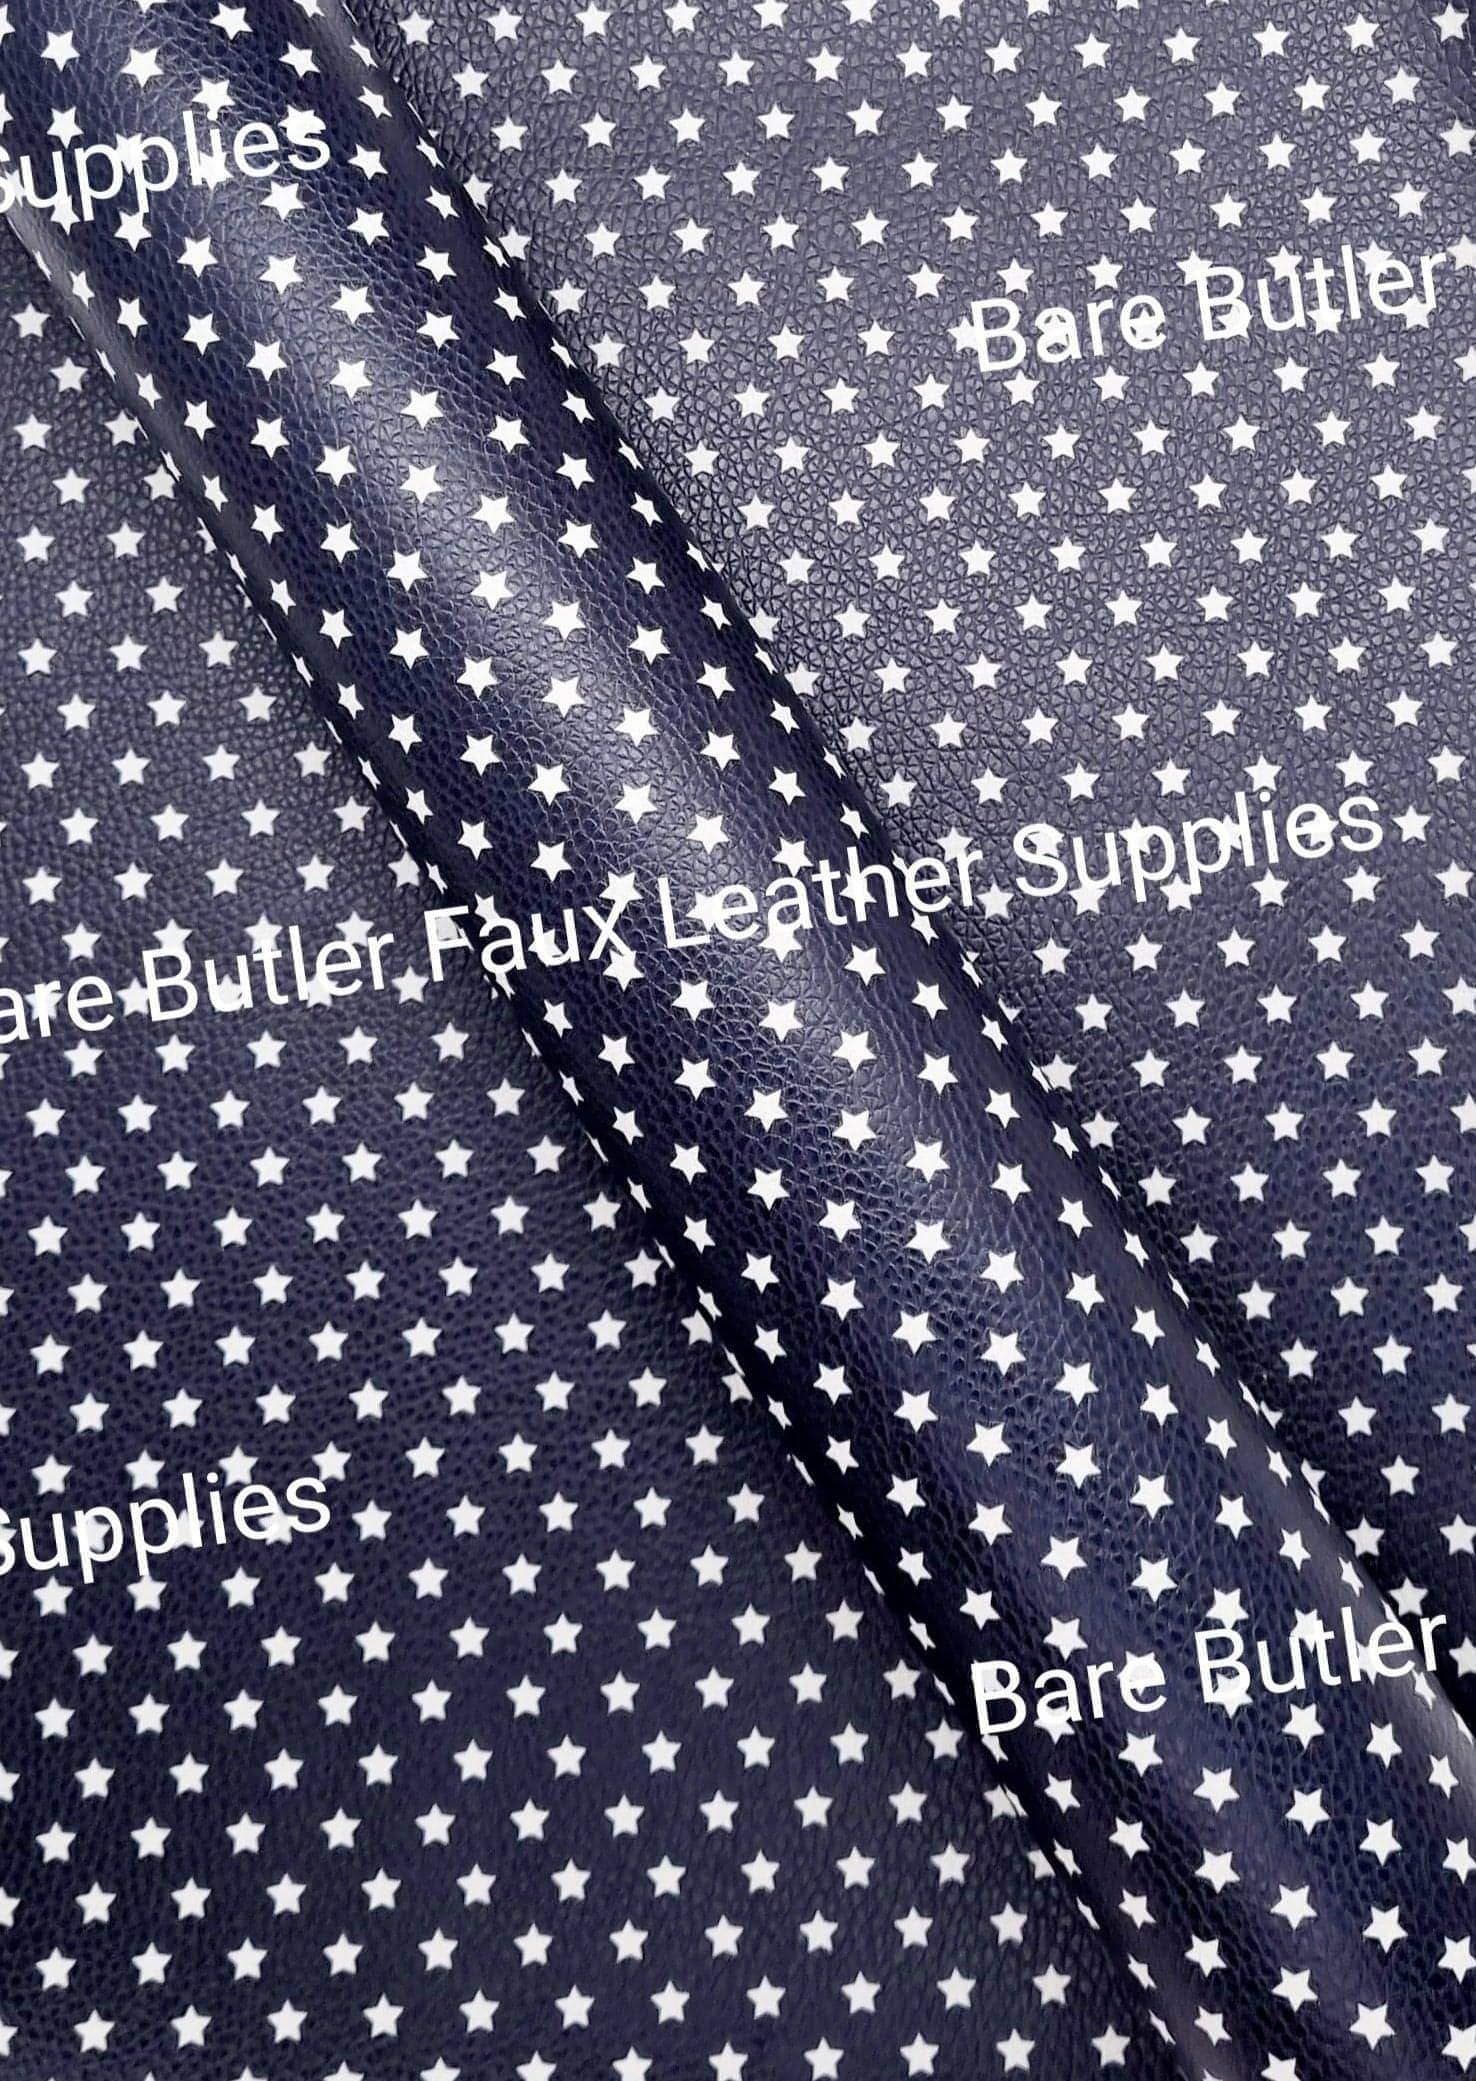 Navy Blue & White Stars Litchi - Fabric, Faux, Faux Leather, Leather, leatherette, Litchi - Bare Butler Faux Leather Supplies 